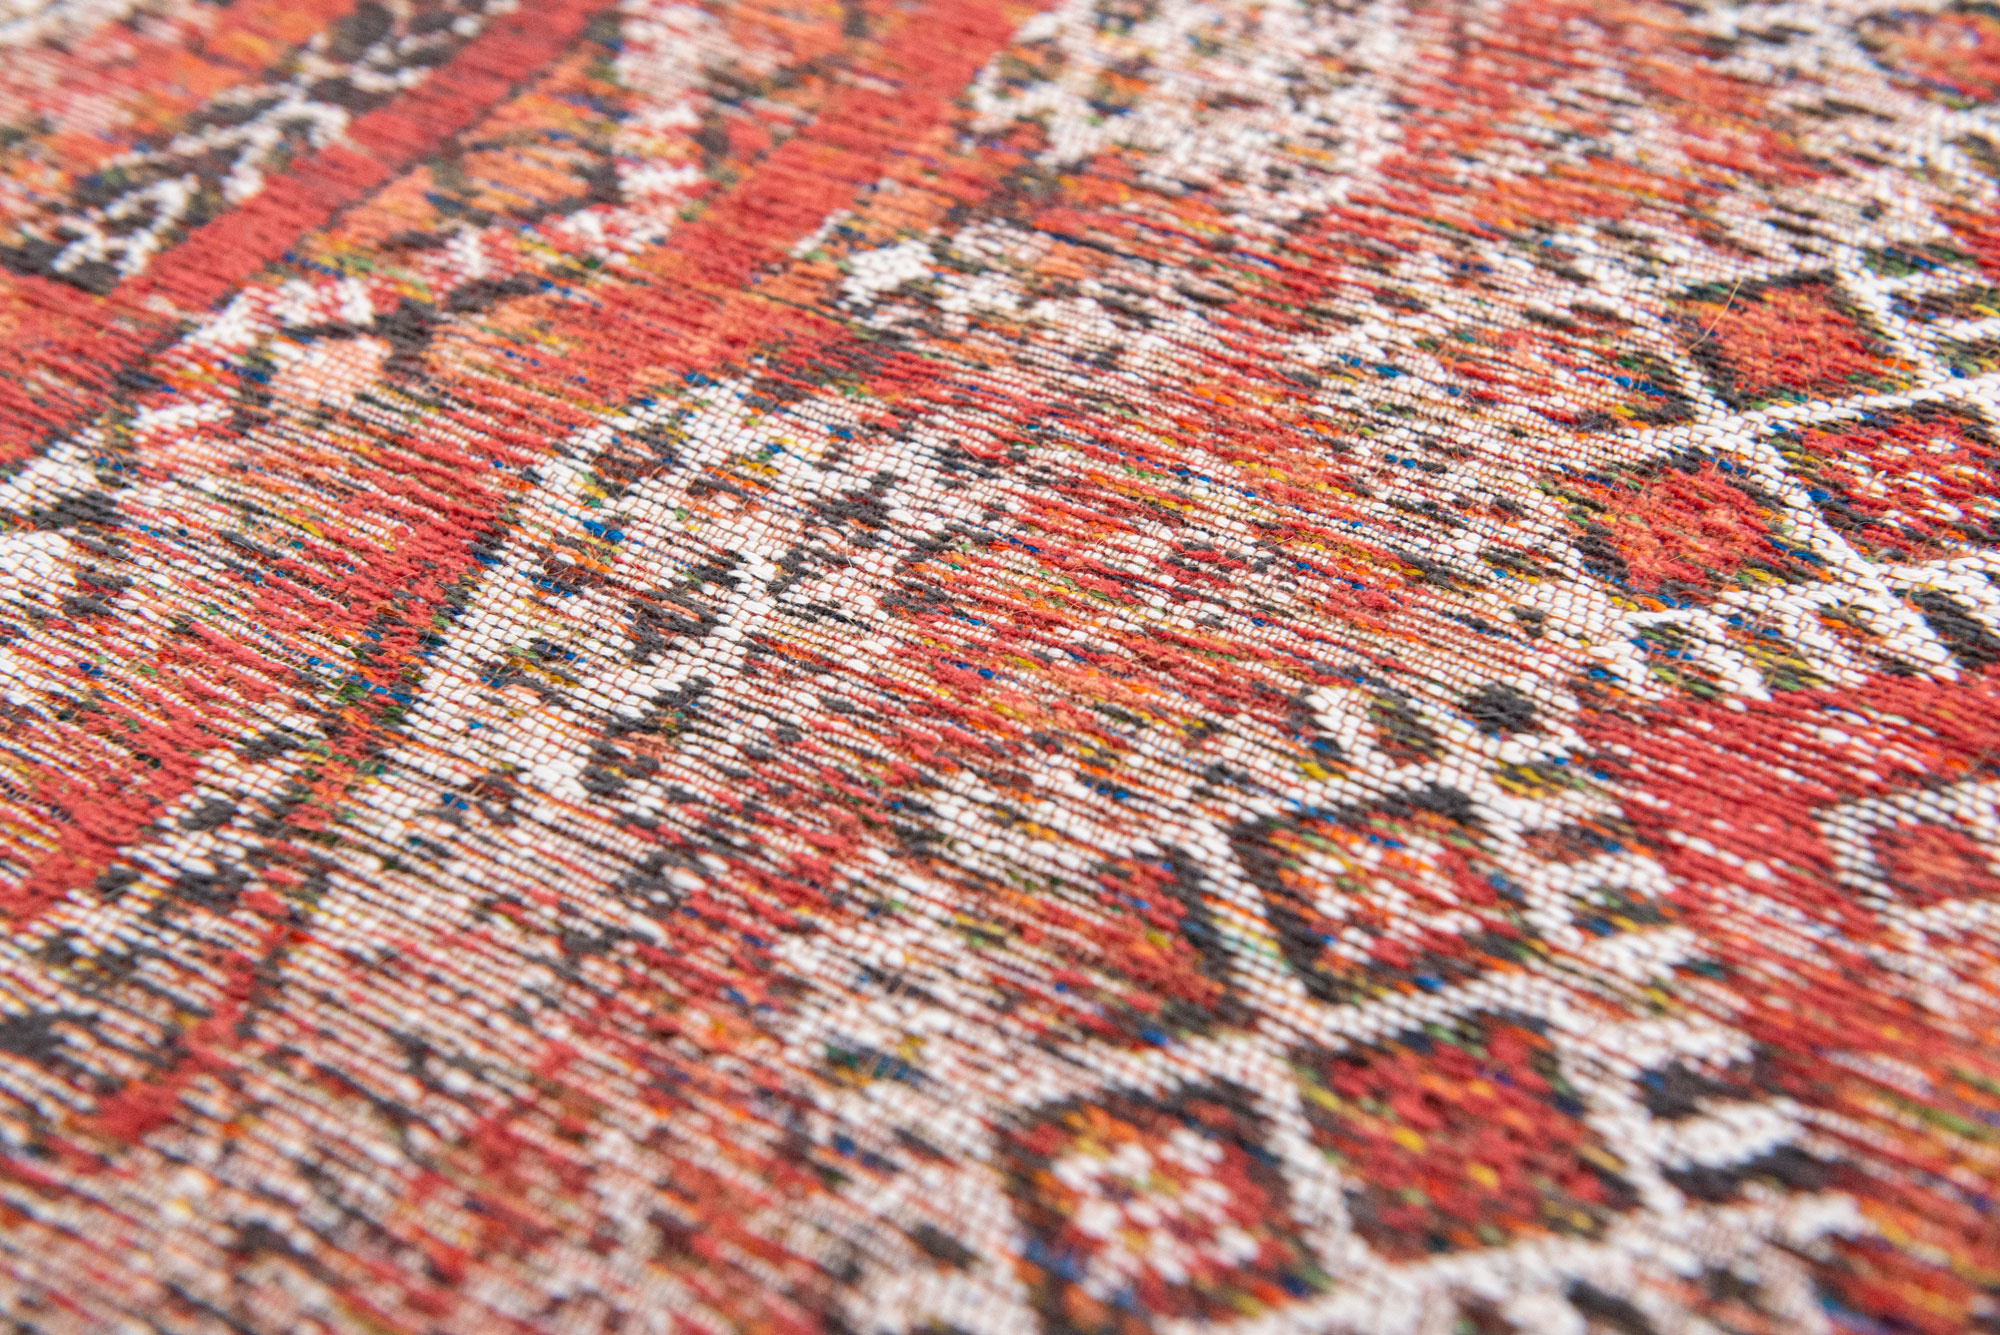 Antiquarian Flatwoven Red Rug ☞ Size: 4' 7" x 6' 7" (140 x 200 cm)